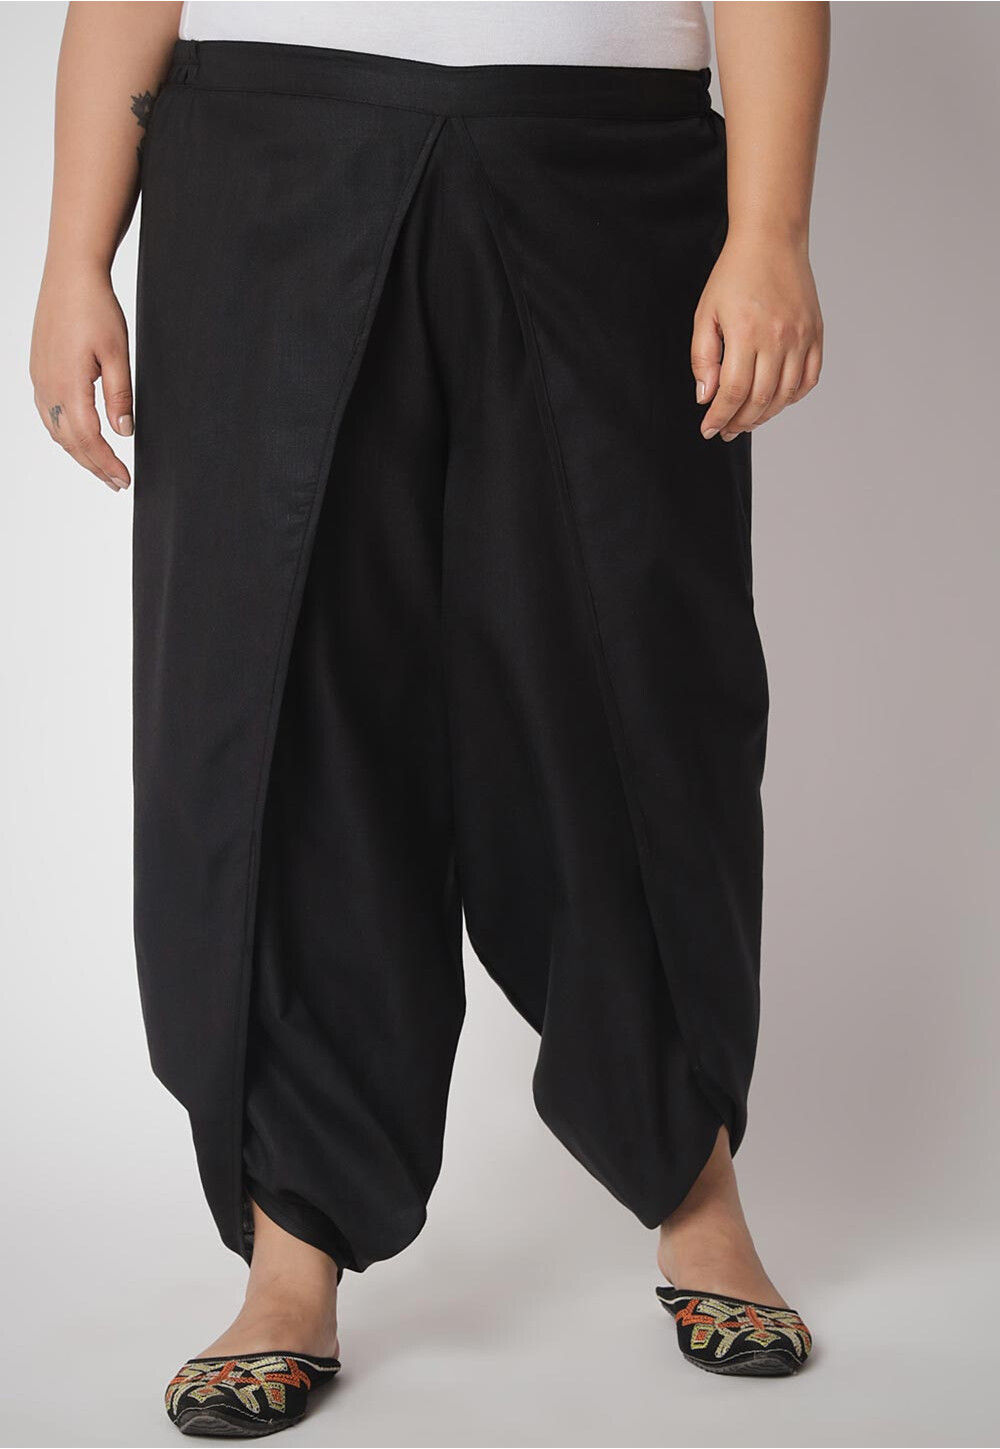 VR Designers Mens Cotton Solid Dhoti Pants with Elasticated Waistband  Black Free Size  Amazonin Clothing  Accessories